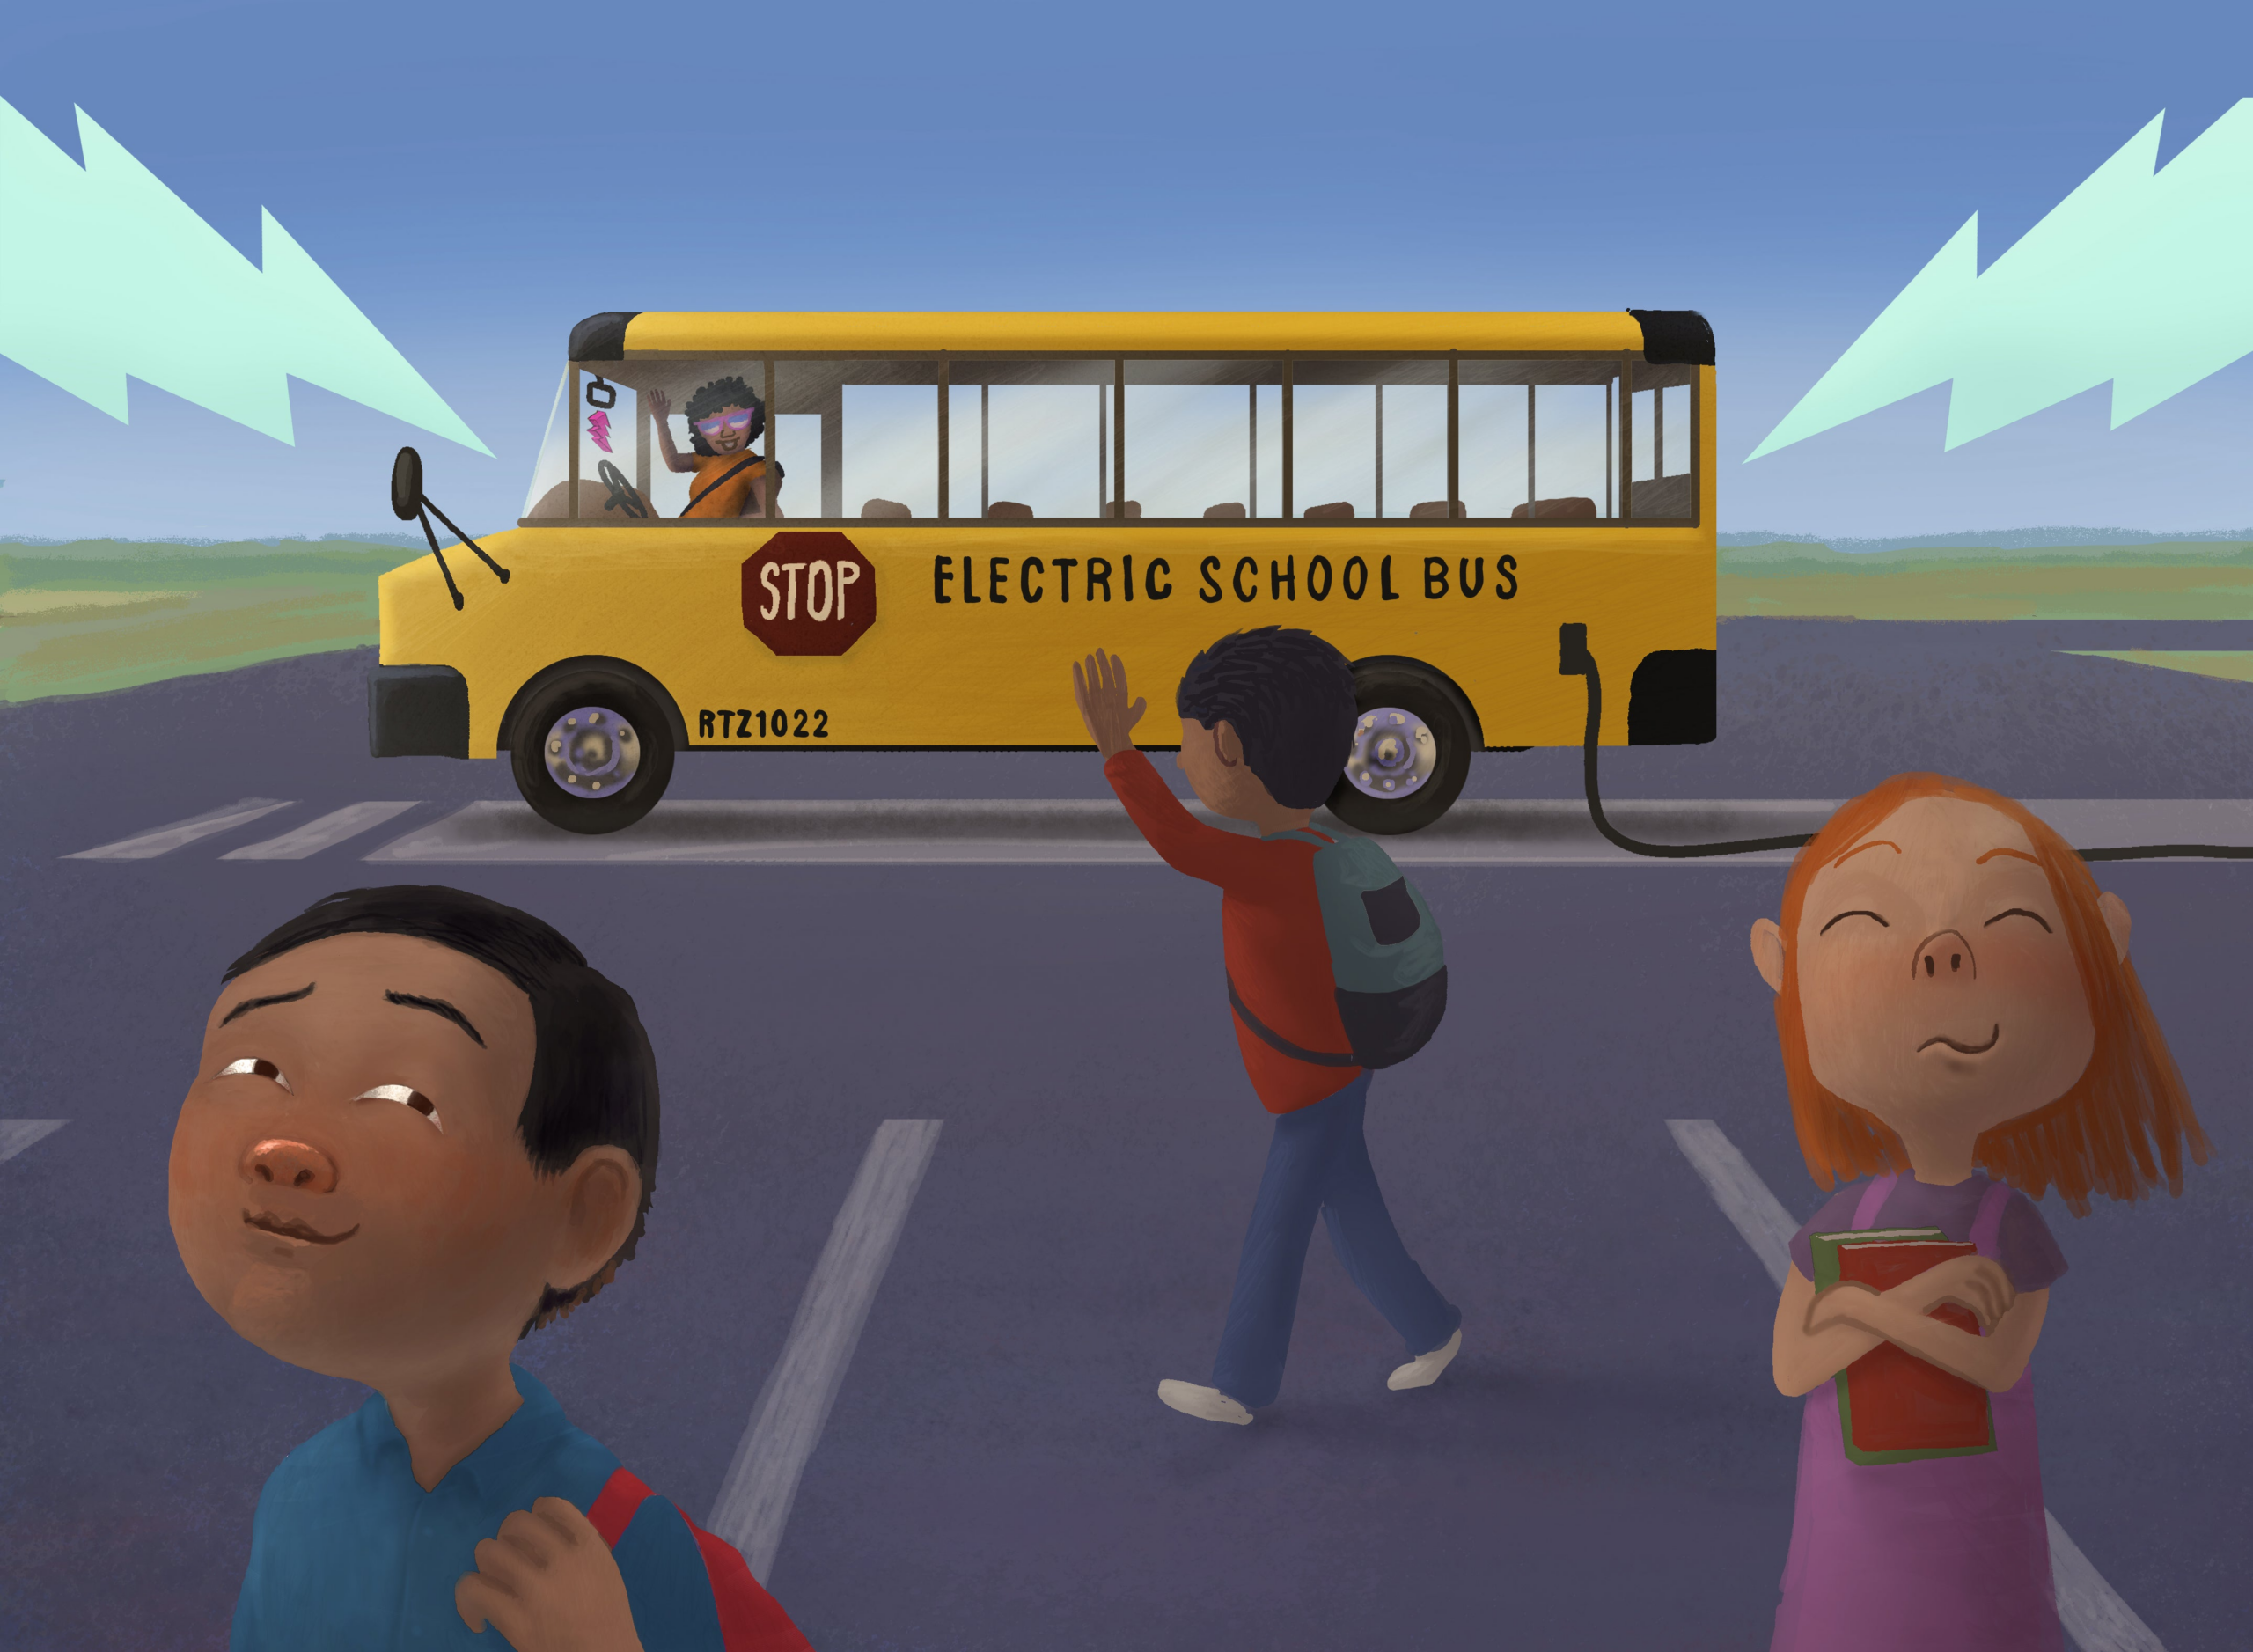 Electric school buses would benefit the 25 million school children who ride the bus to school every day in the United States.